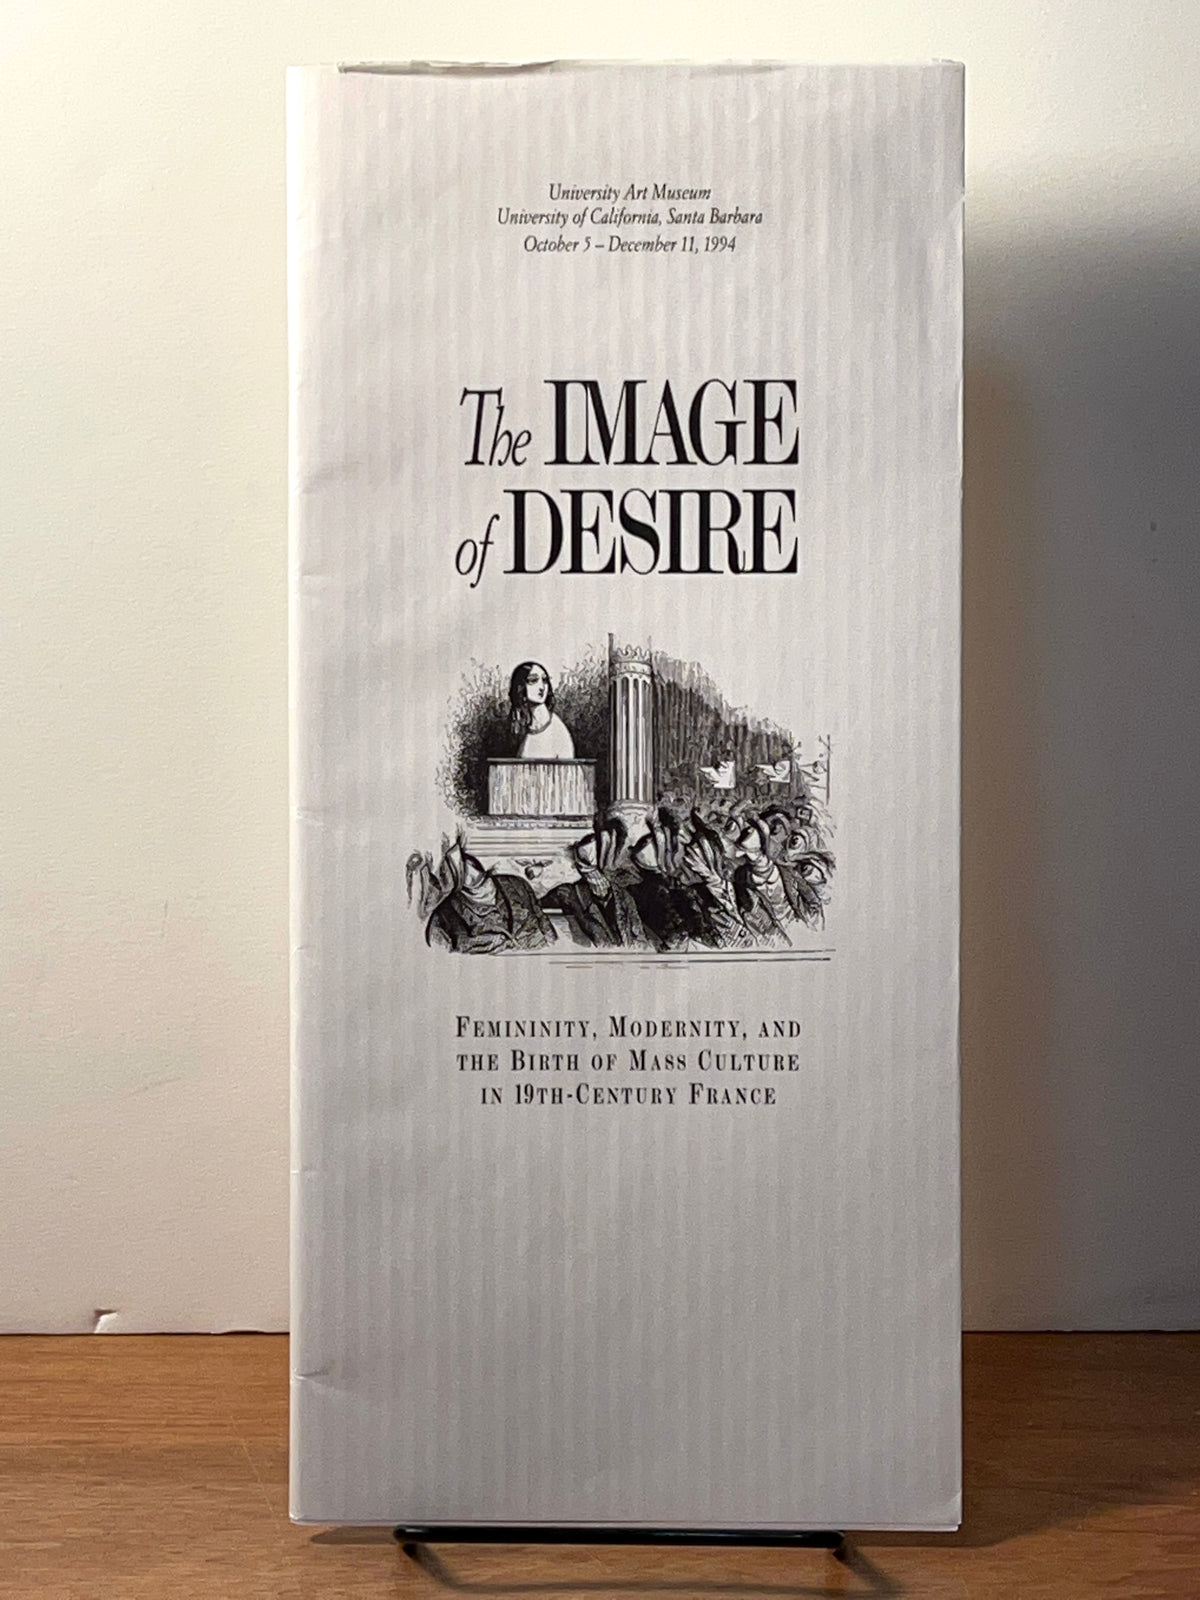 The Image of Desire: Femininity, Modernity and the Birth of Mass Culture in 19th-Century France, 1994, Near Fine.